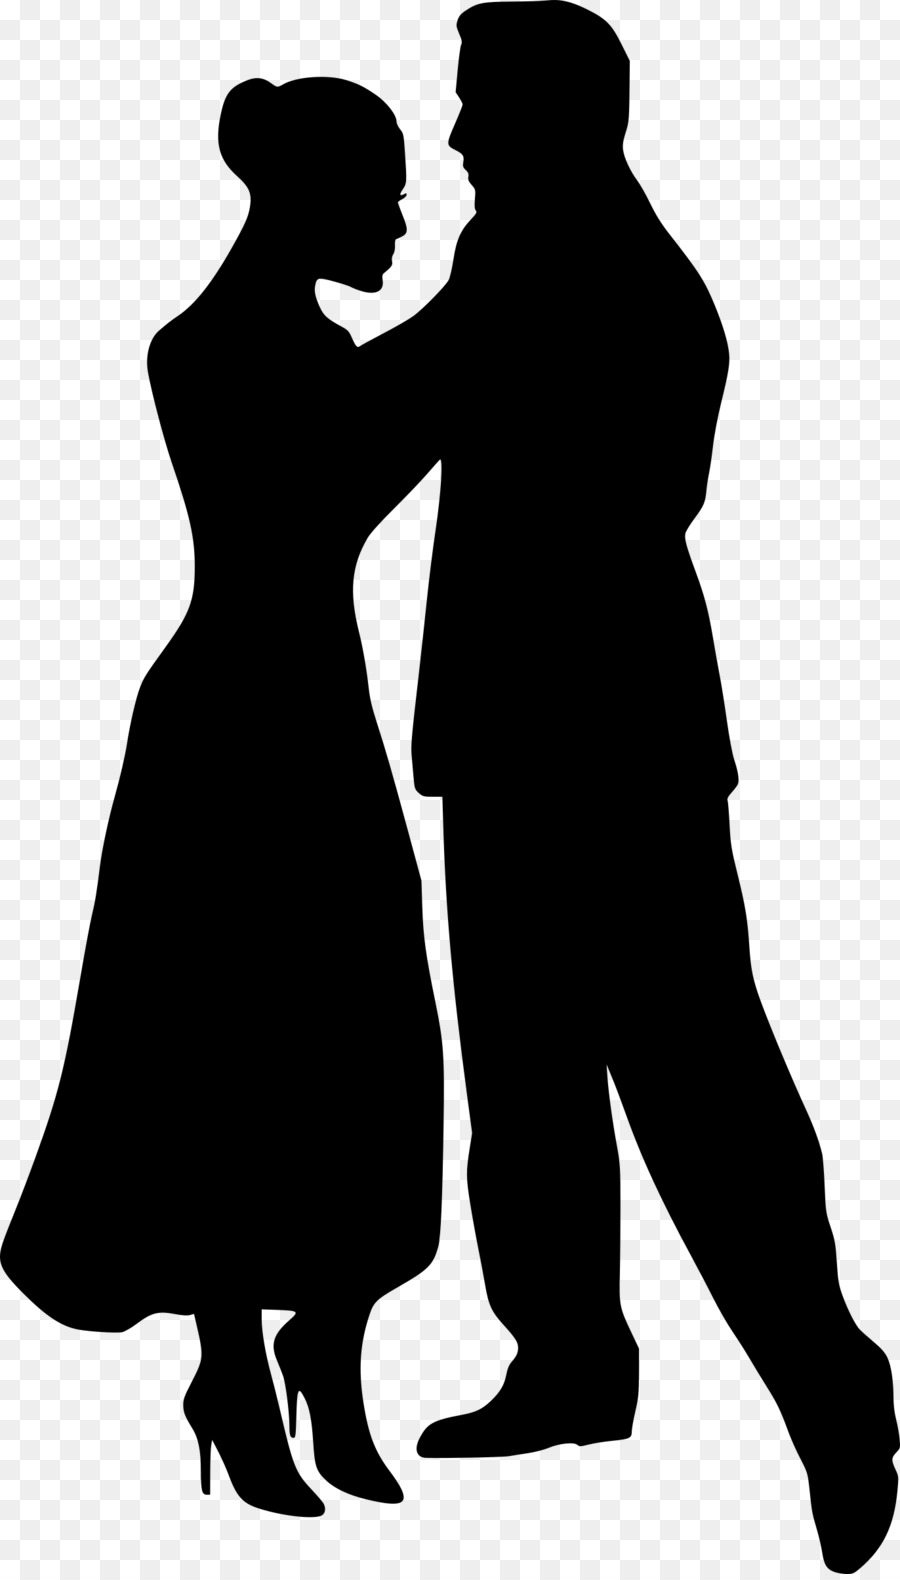 Silhouette Dance Clip art - couples people png download - 1372*2400 - Free Transparent Silhouette png Download.